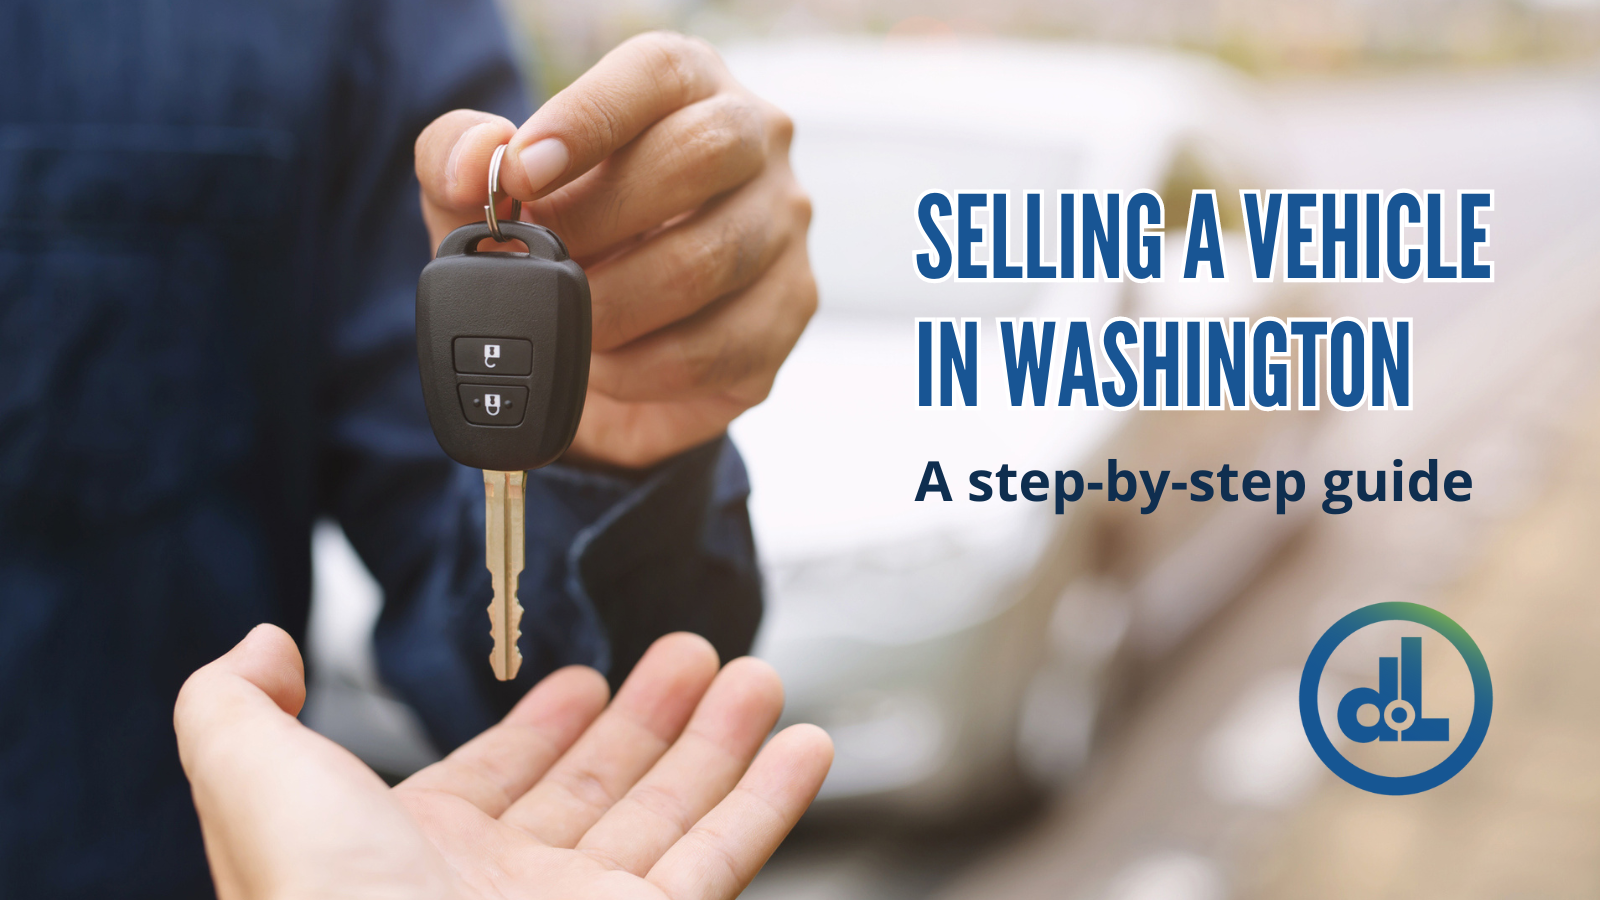 How to sell a vehicle in Washington state: A step-by-step guide – Licensing  Express